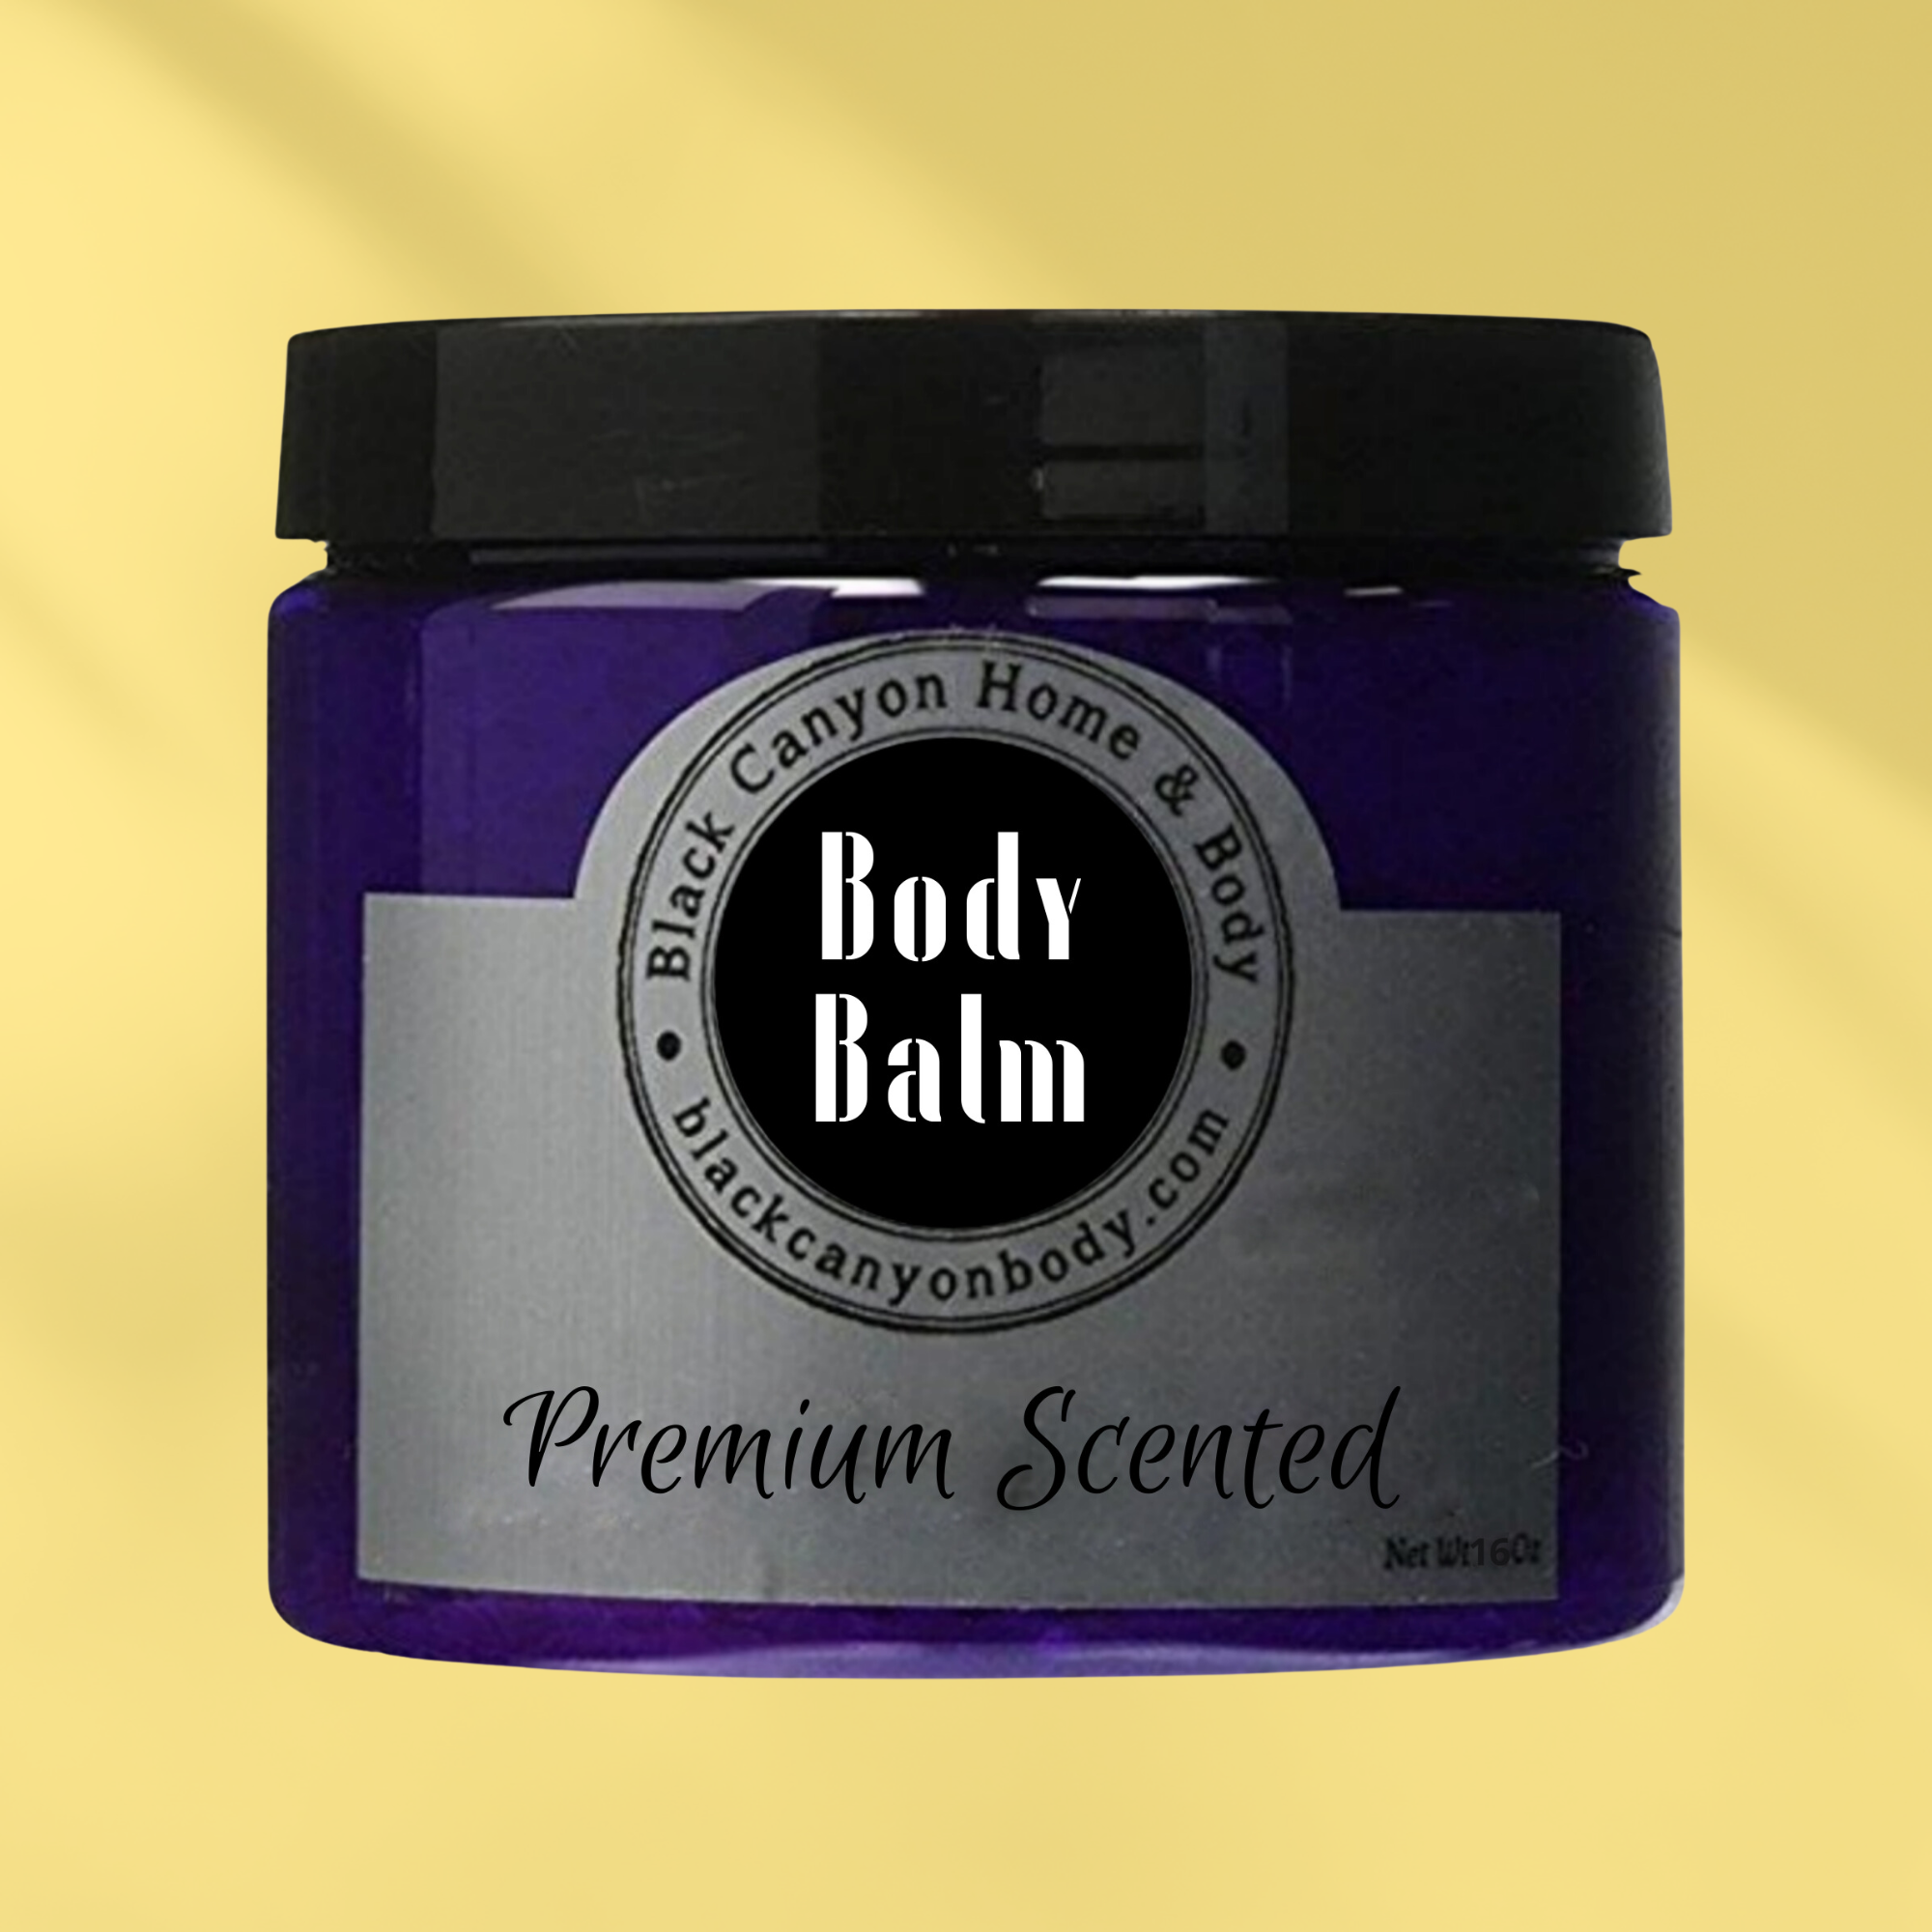 Black Canyon Poinsettia Scented Natural Body Balm with Shea